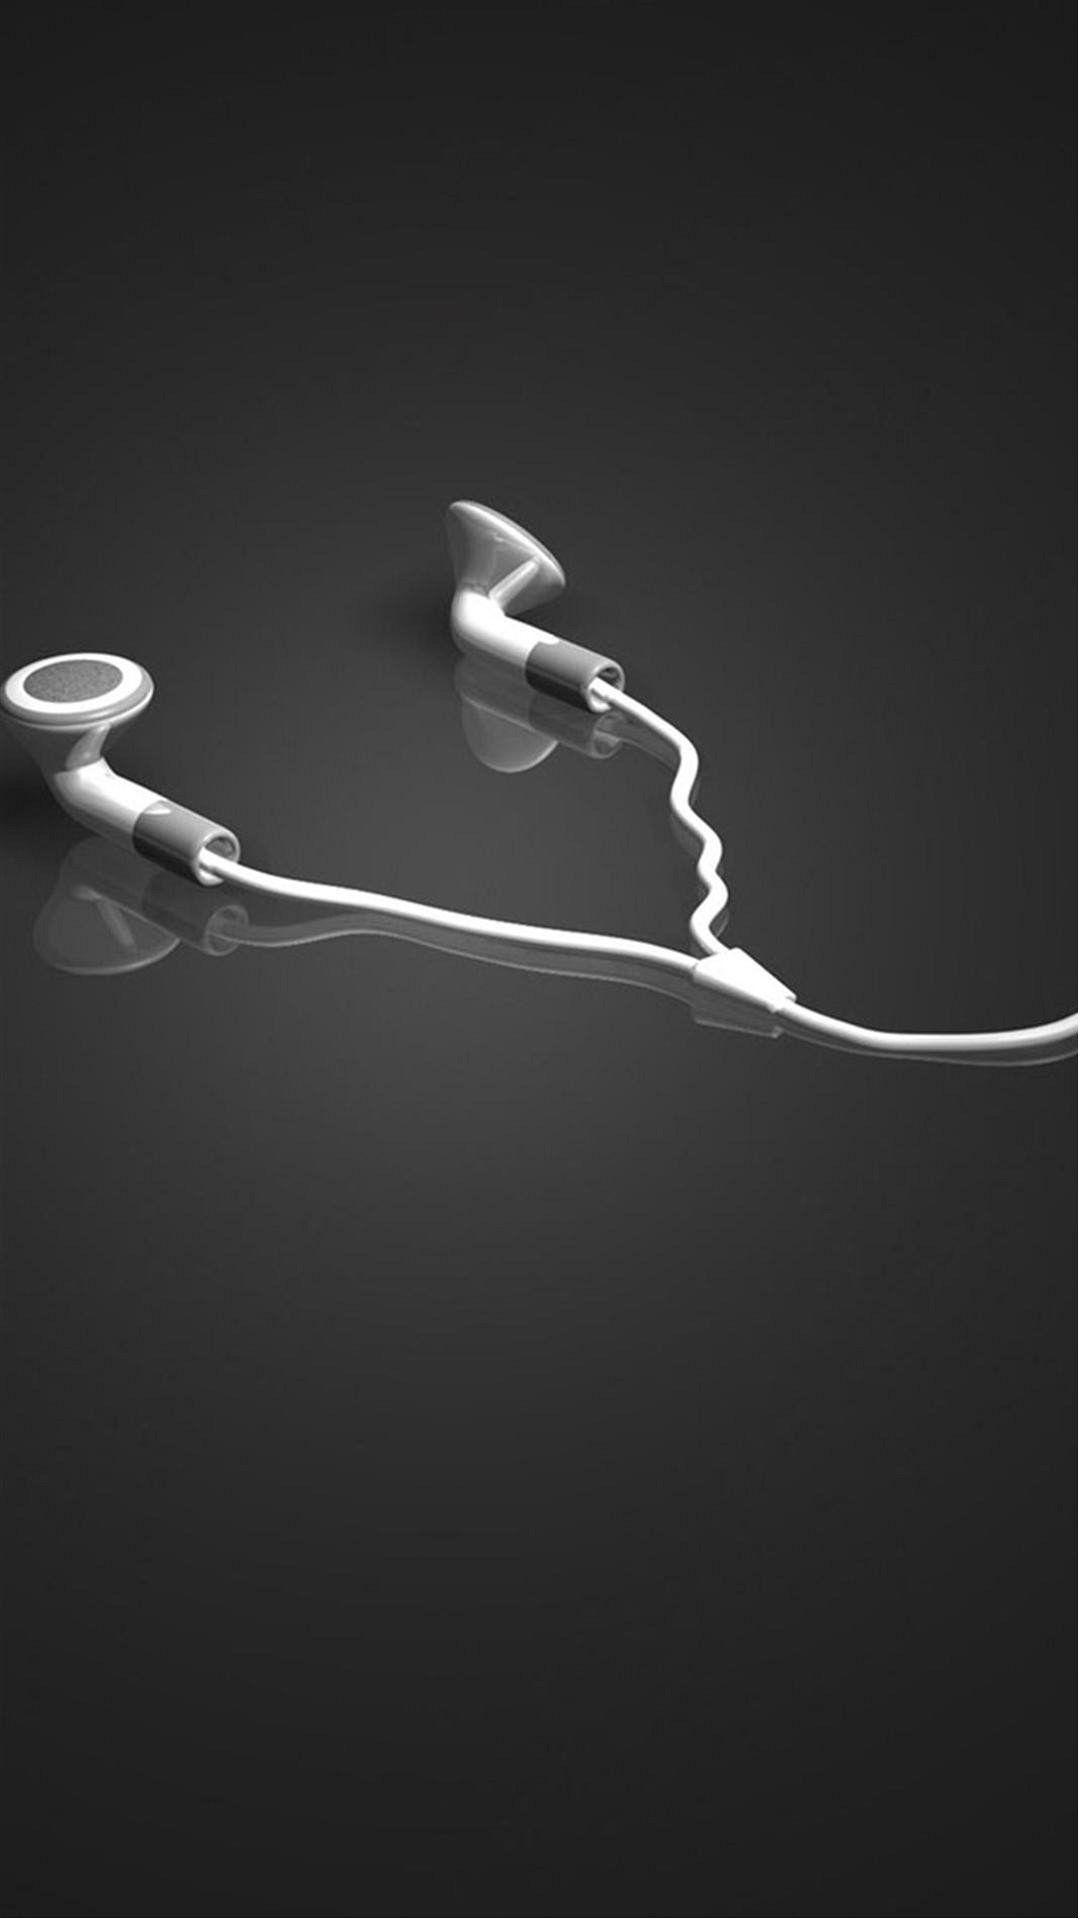 Earphones htc one wallpaper, free and easy to download. Phone wallpaper design, Love wallpaper background, Music wallpaper